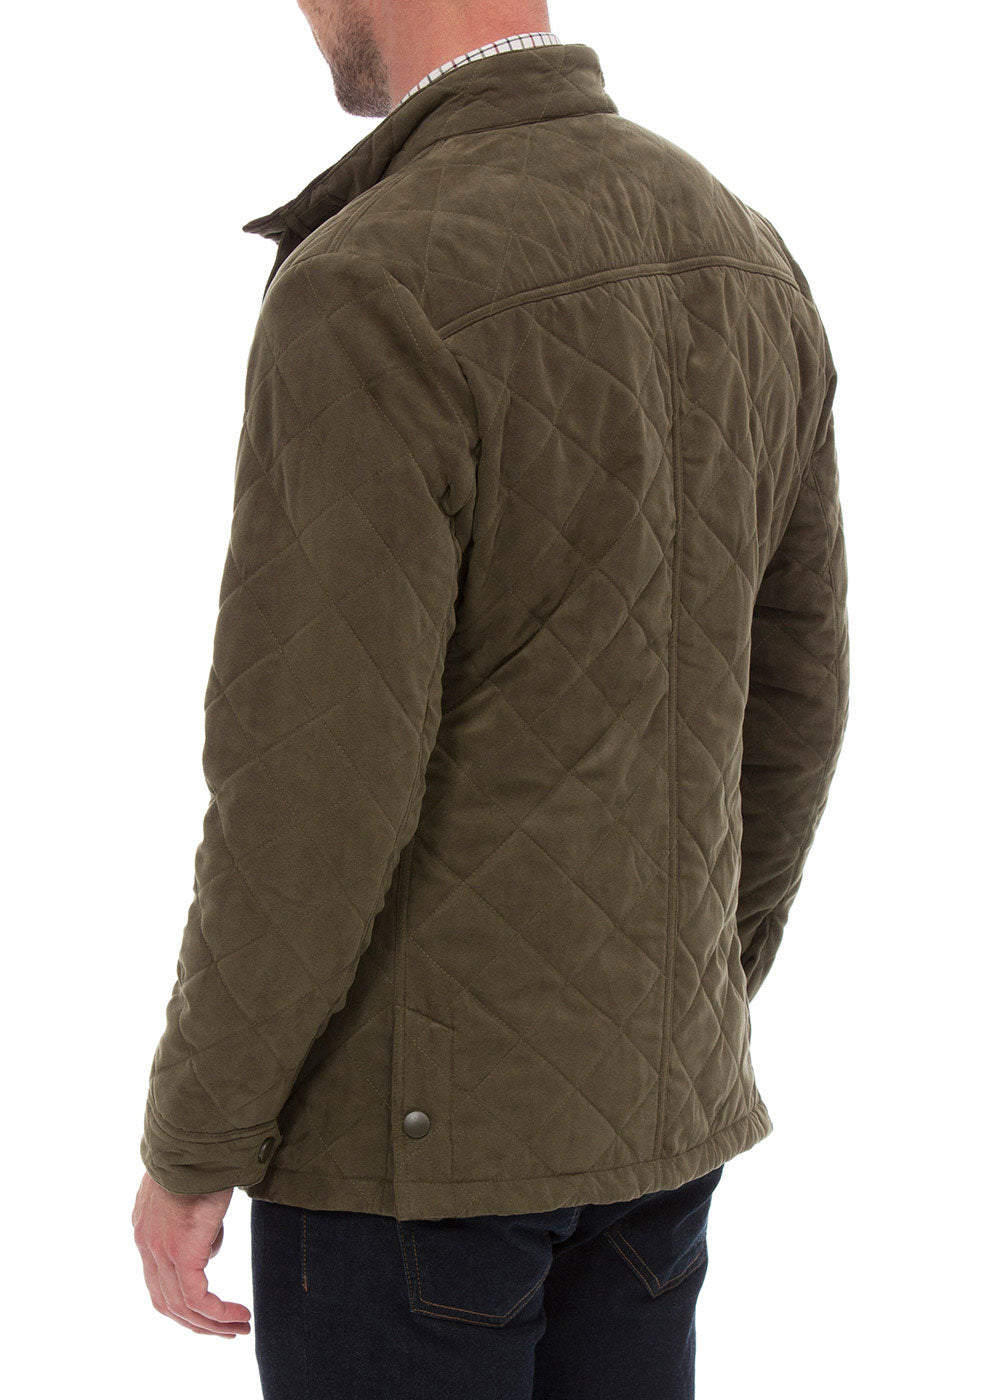 Back view felwell country jacket 